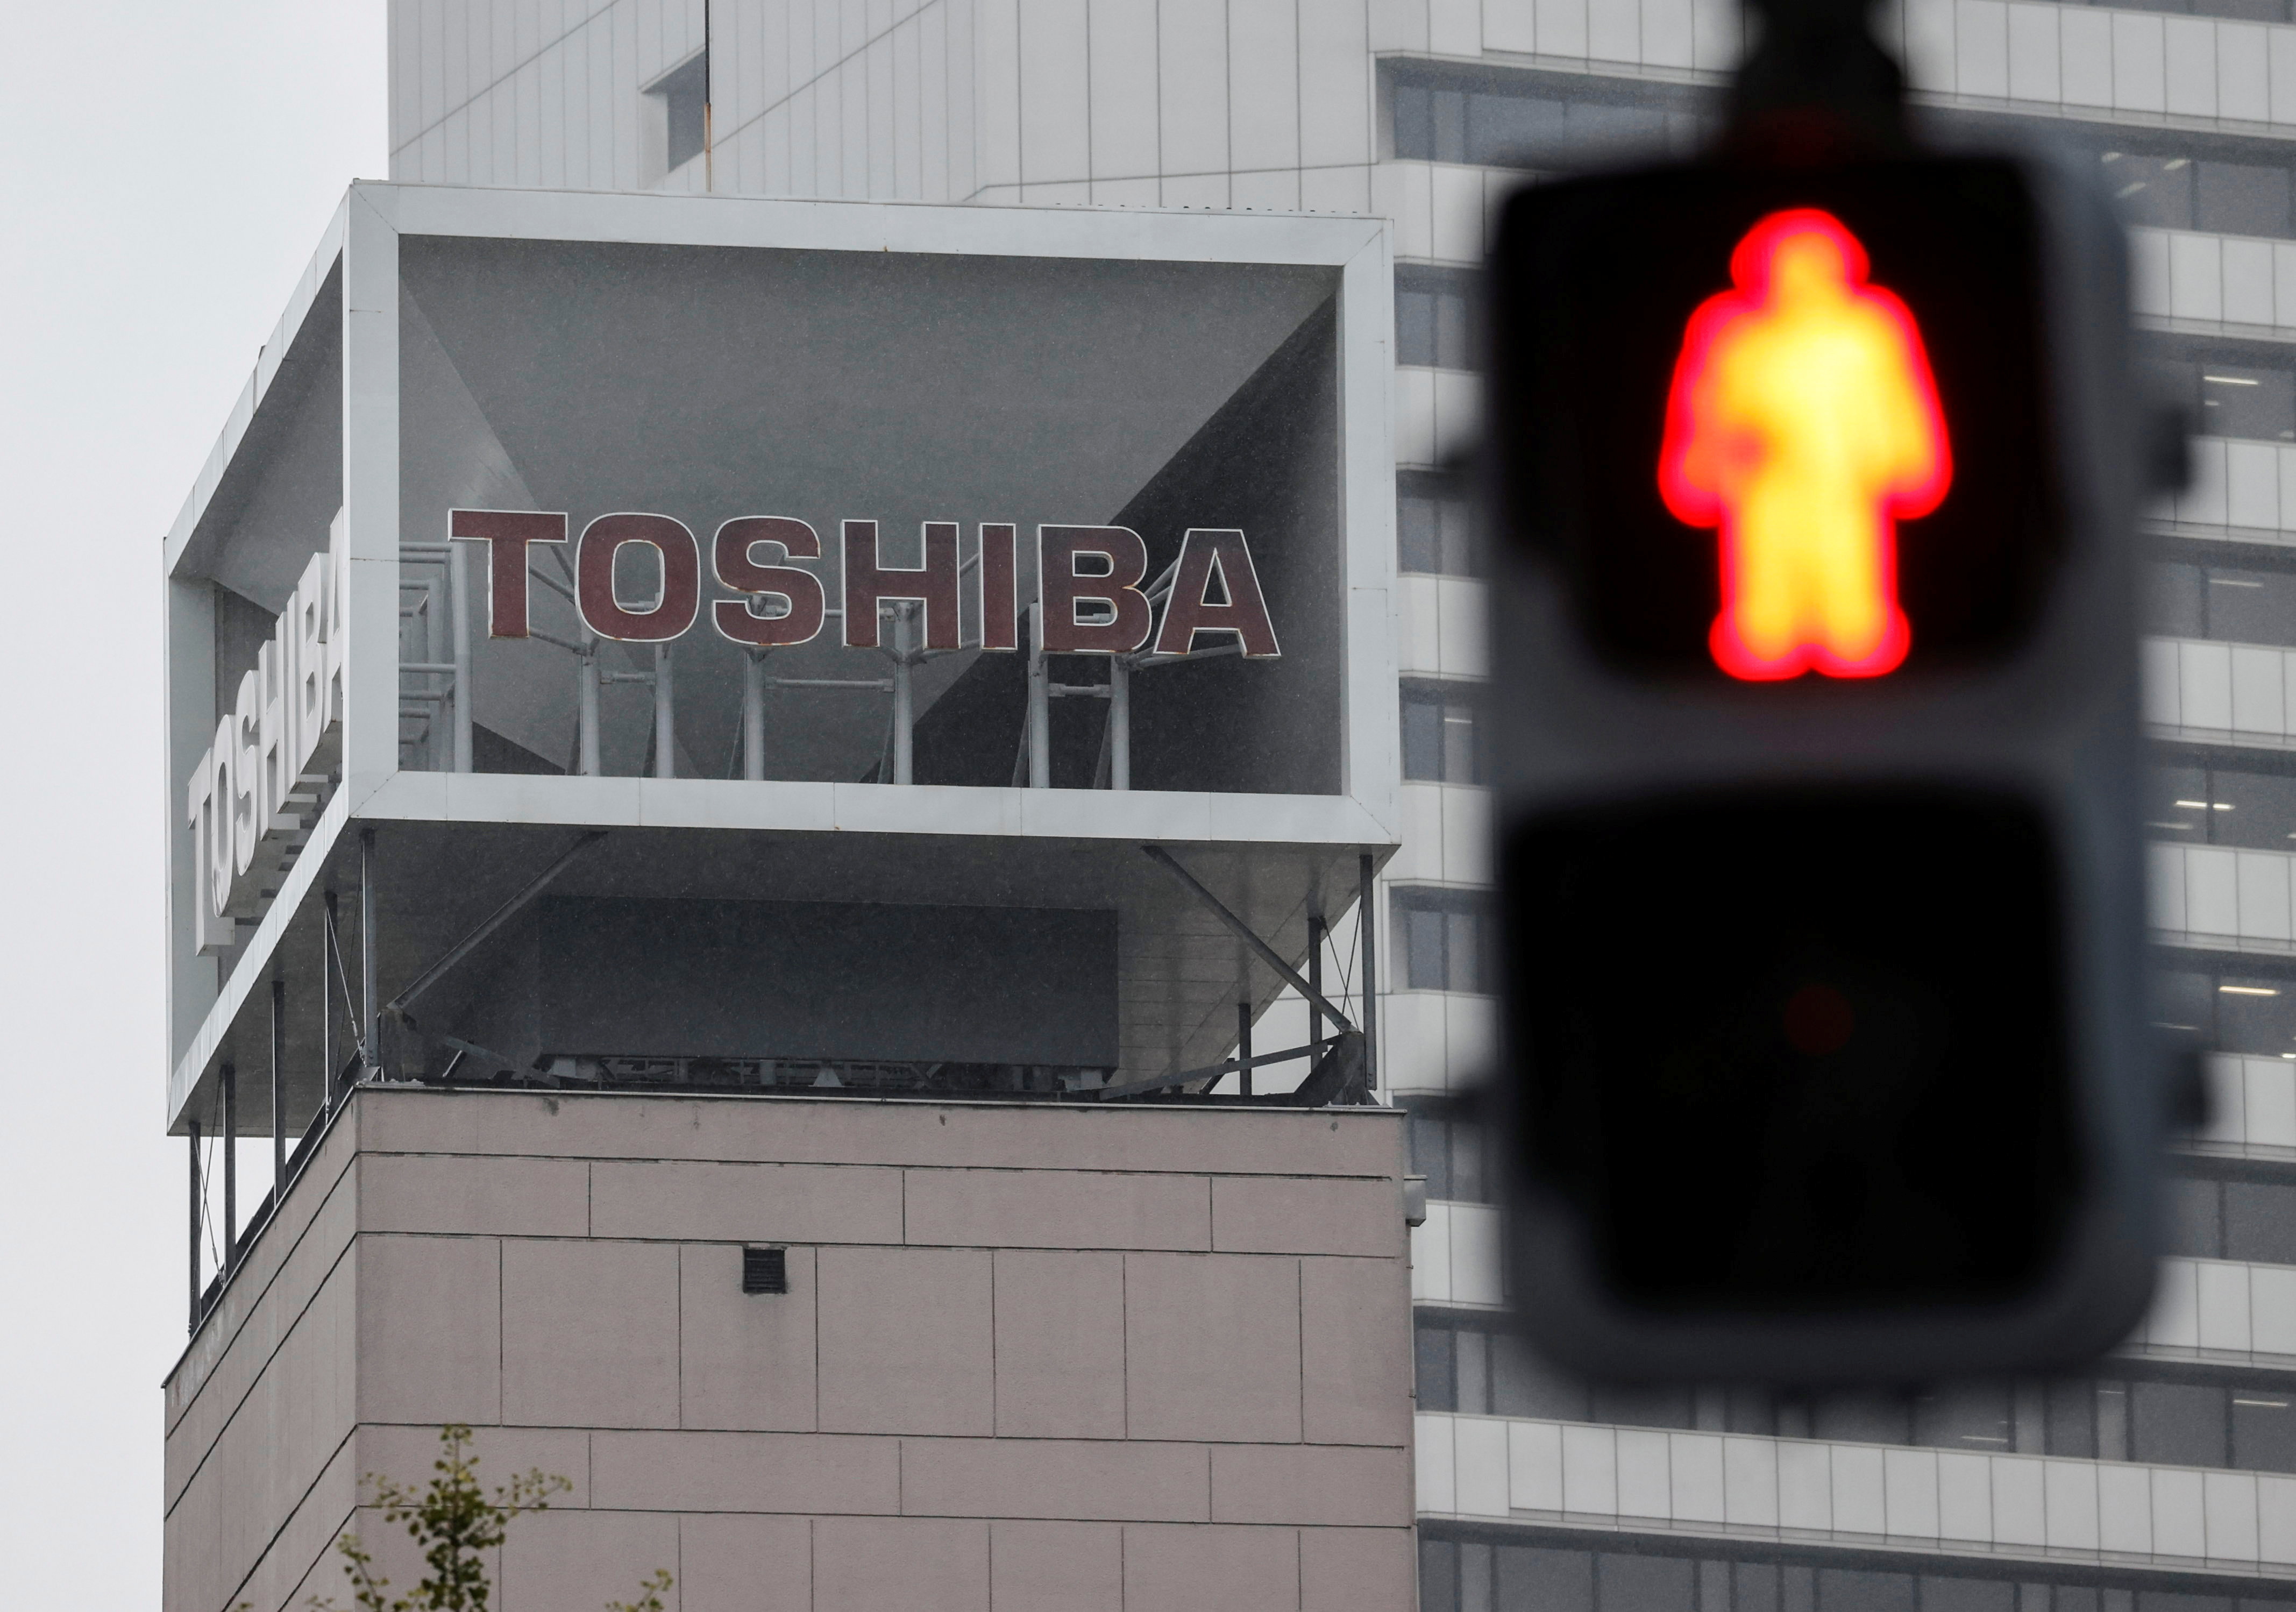 The logo of Toshiba Corp. is seen next to a traffic signal atop of a building in Tokyo